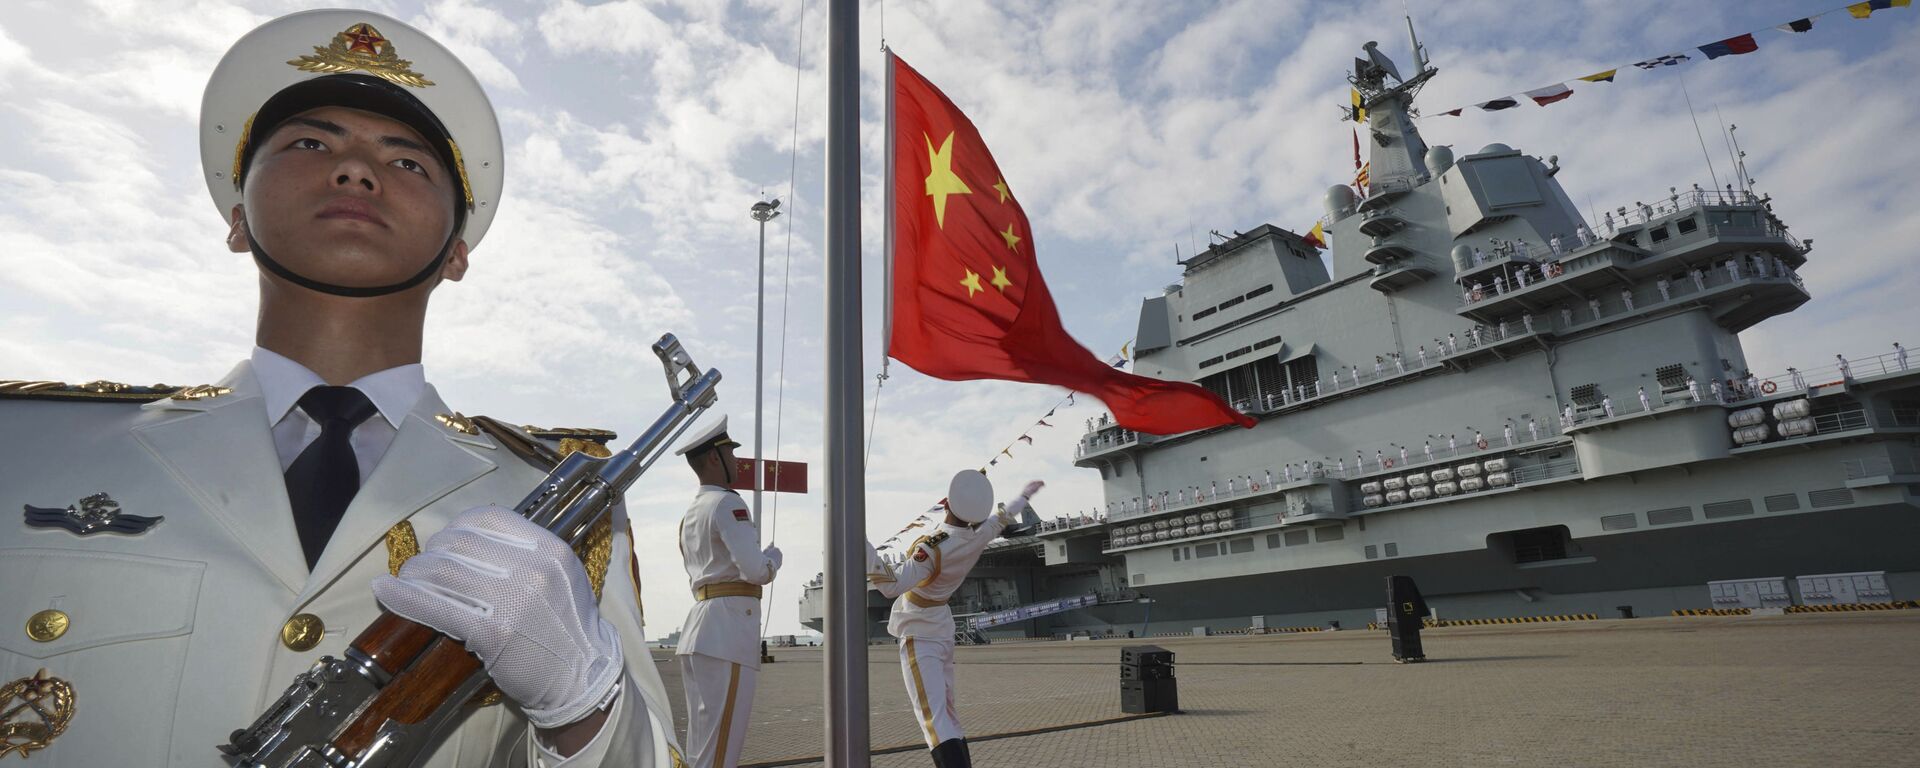 In this photo taken Dec. 17, 2019 and released Dec. 27, 2019 by Xinhua News Agency, Chinese honor guard raise the Chinese flag during the commissioning ceremony of China's Shandong aircraft carrier at a naval port in Sanya, south China's Hainan Province - Sputnik International, 1920, 16.09.2021